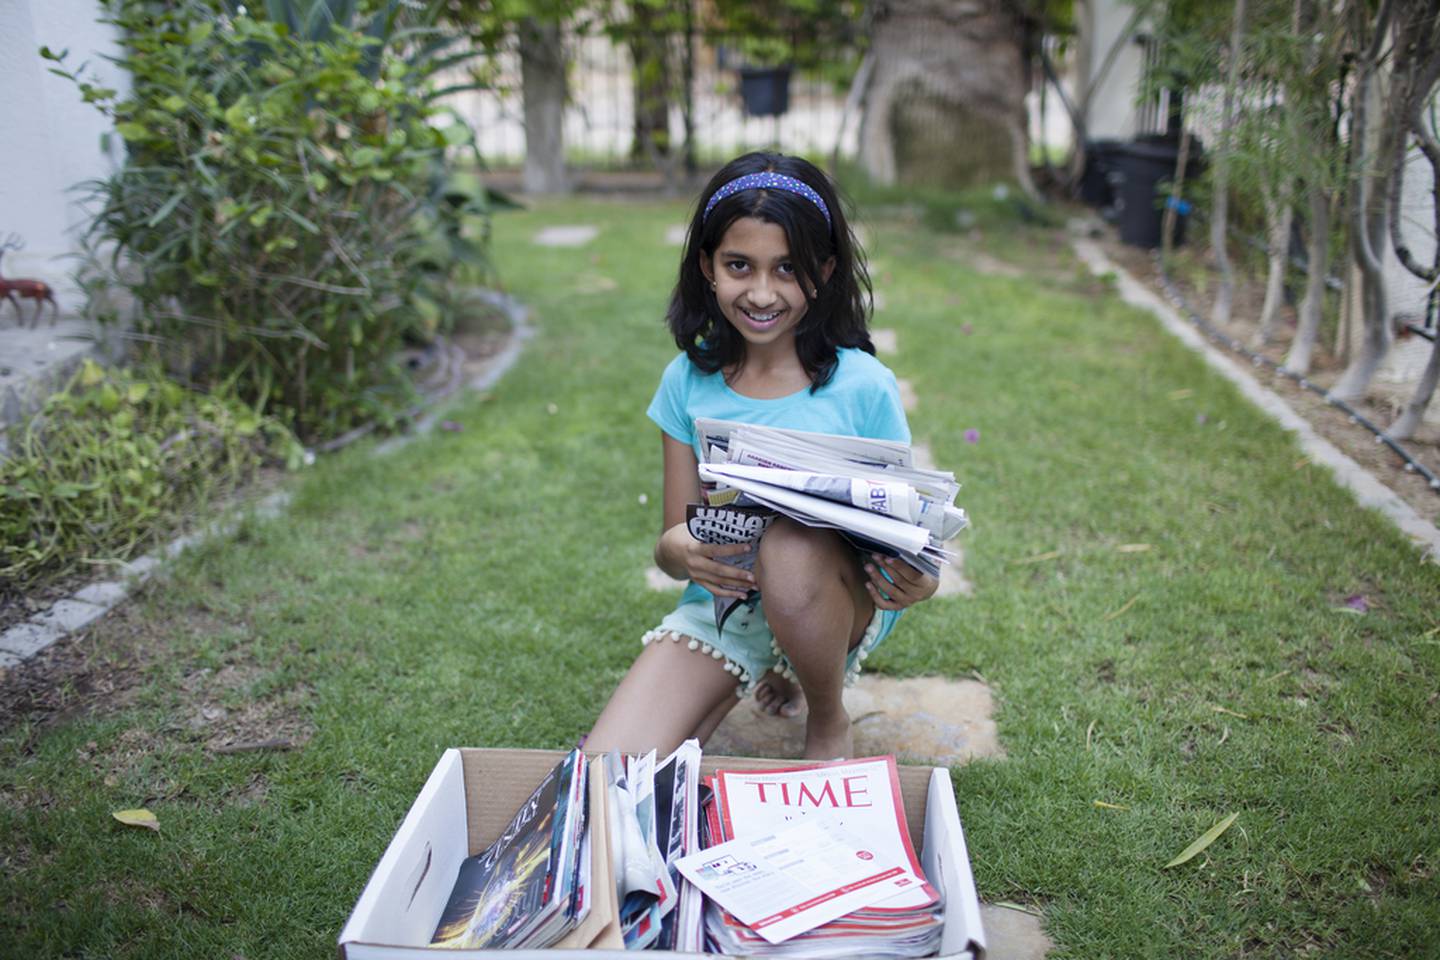 UAE resident Sagarika Sriram started raising awareness about environmental issues when she was 10 years old. Photo: Anna Nielsen for The National